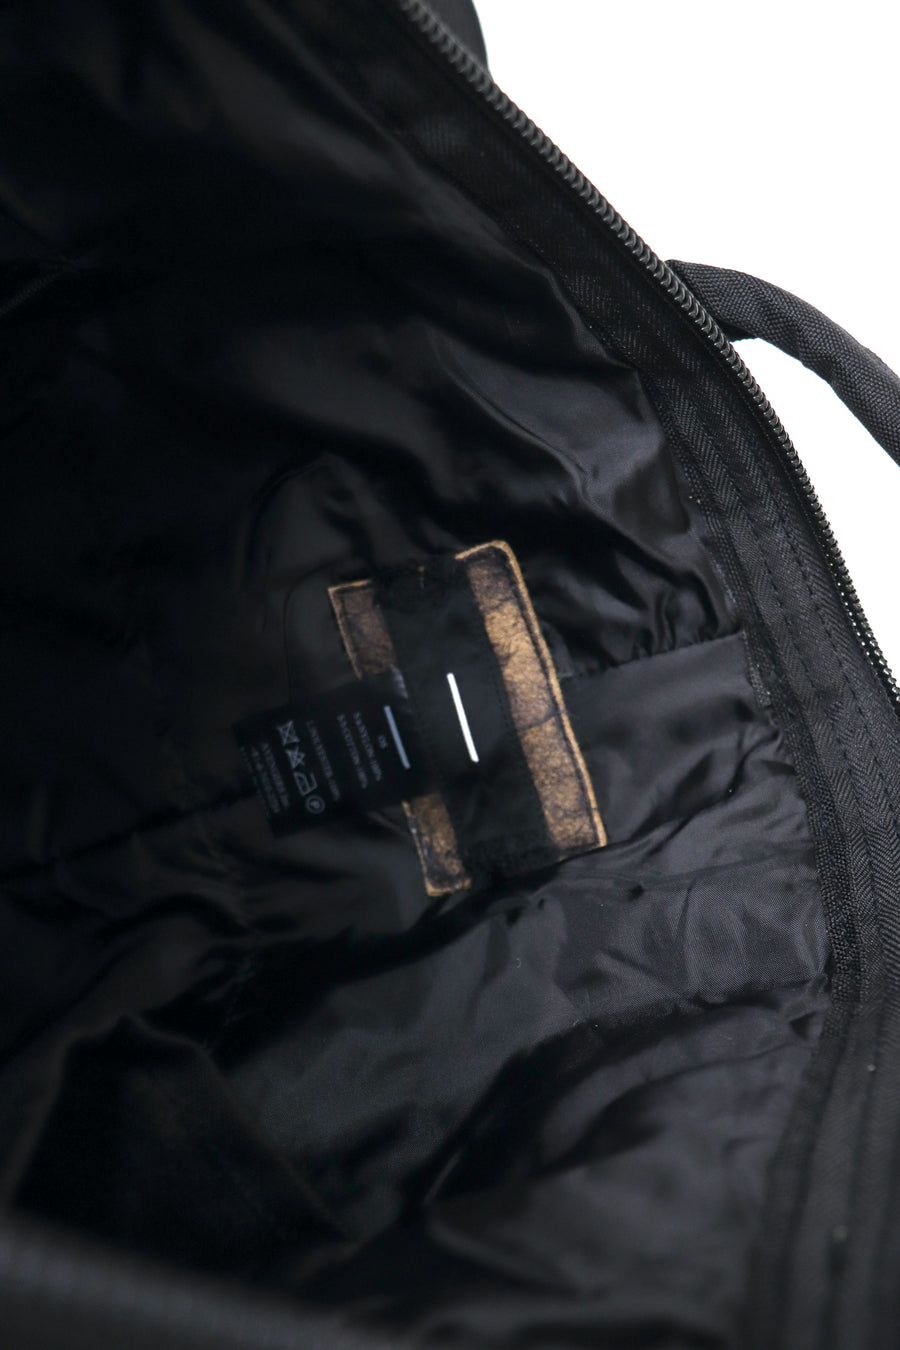 ［ー］Minus  For Flyer’s Helmet Bag With Patched